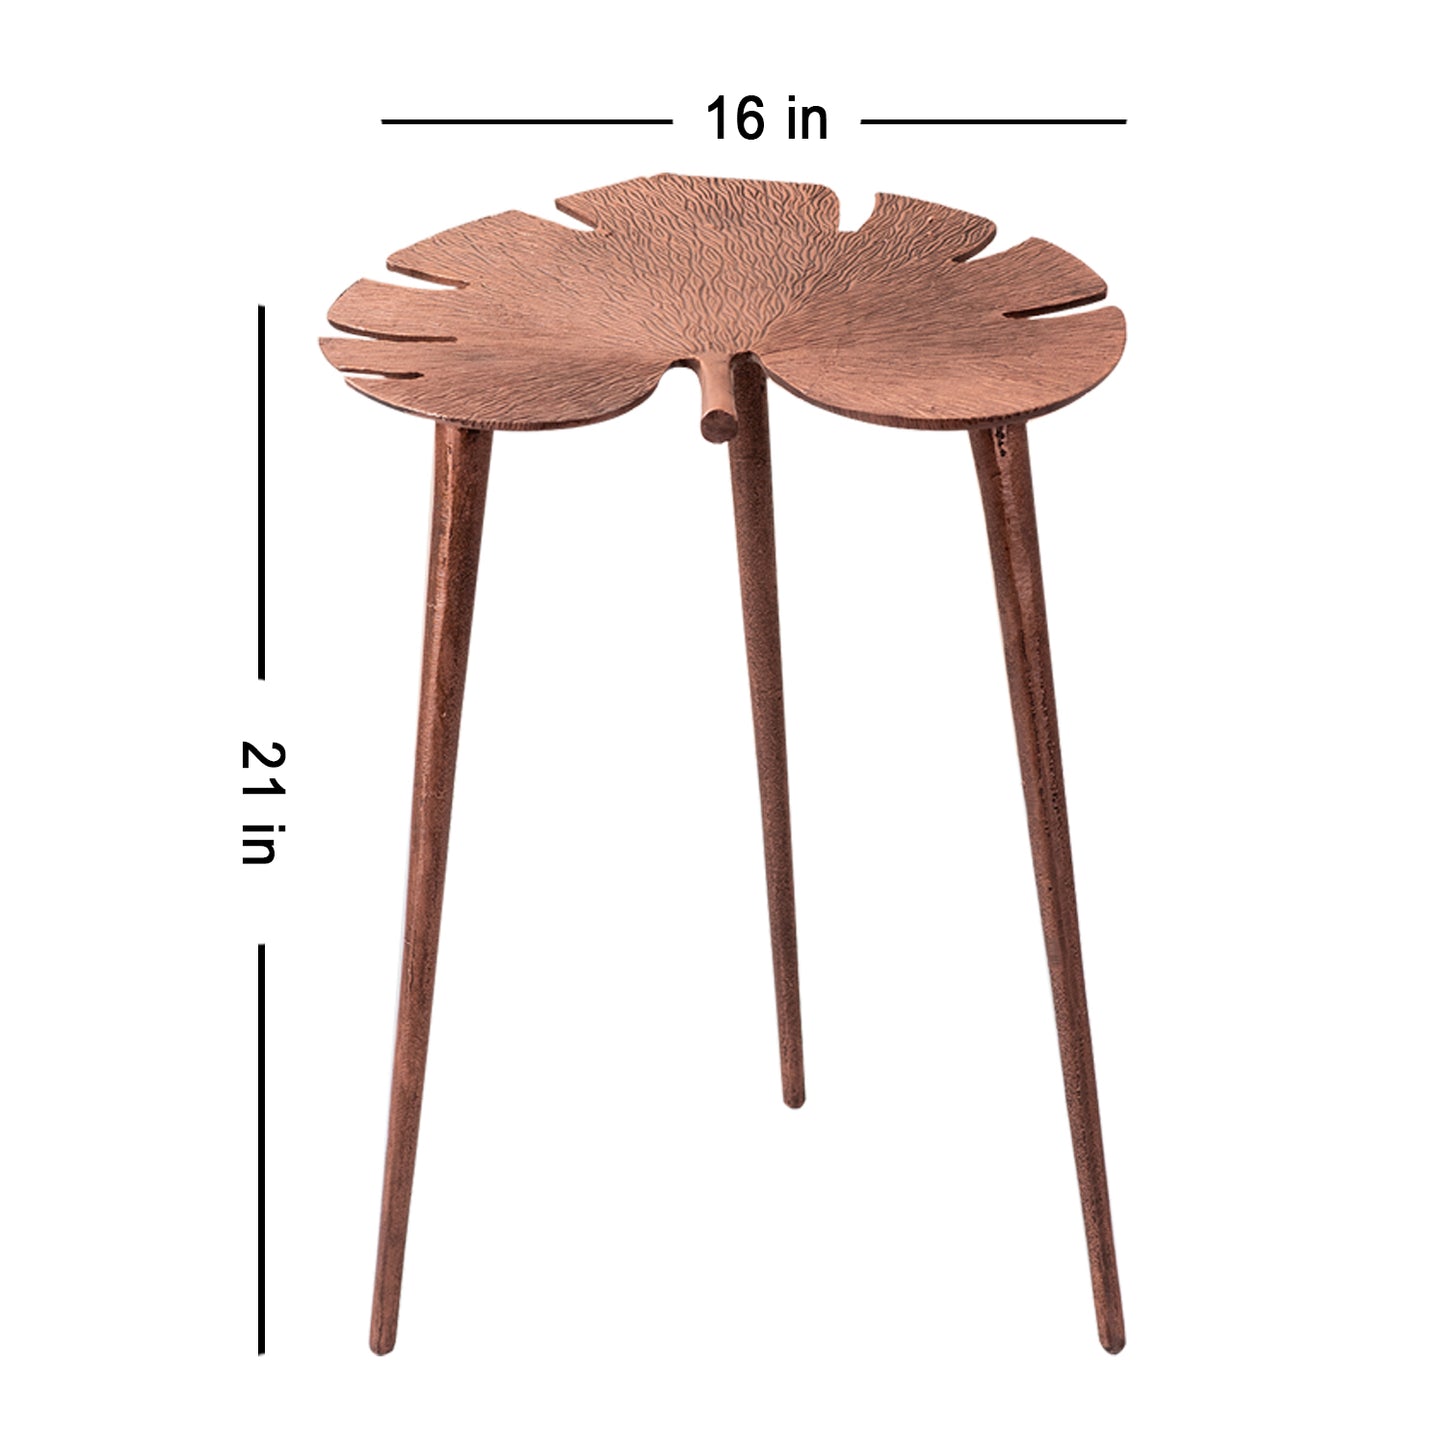 Copper Side Table 